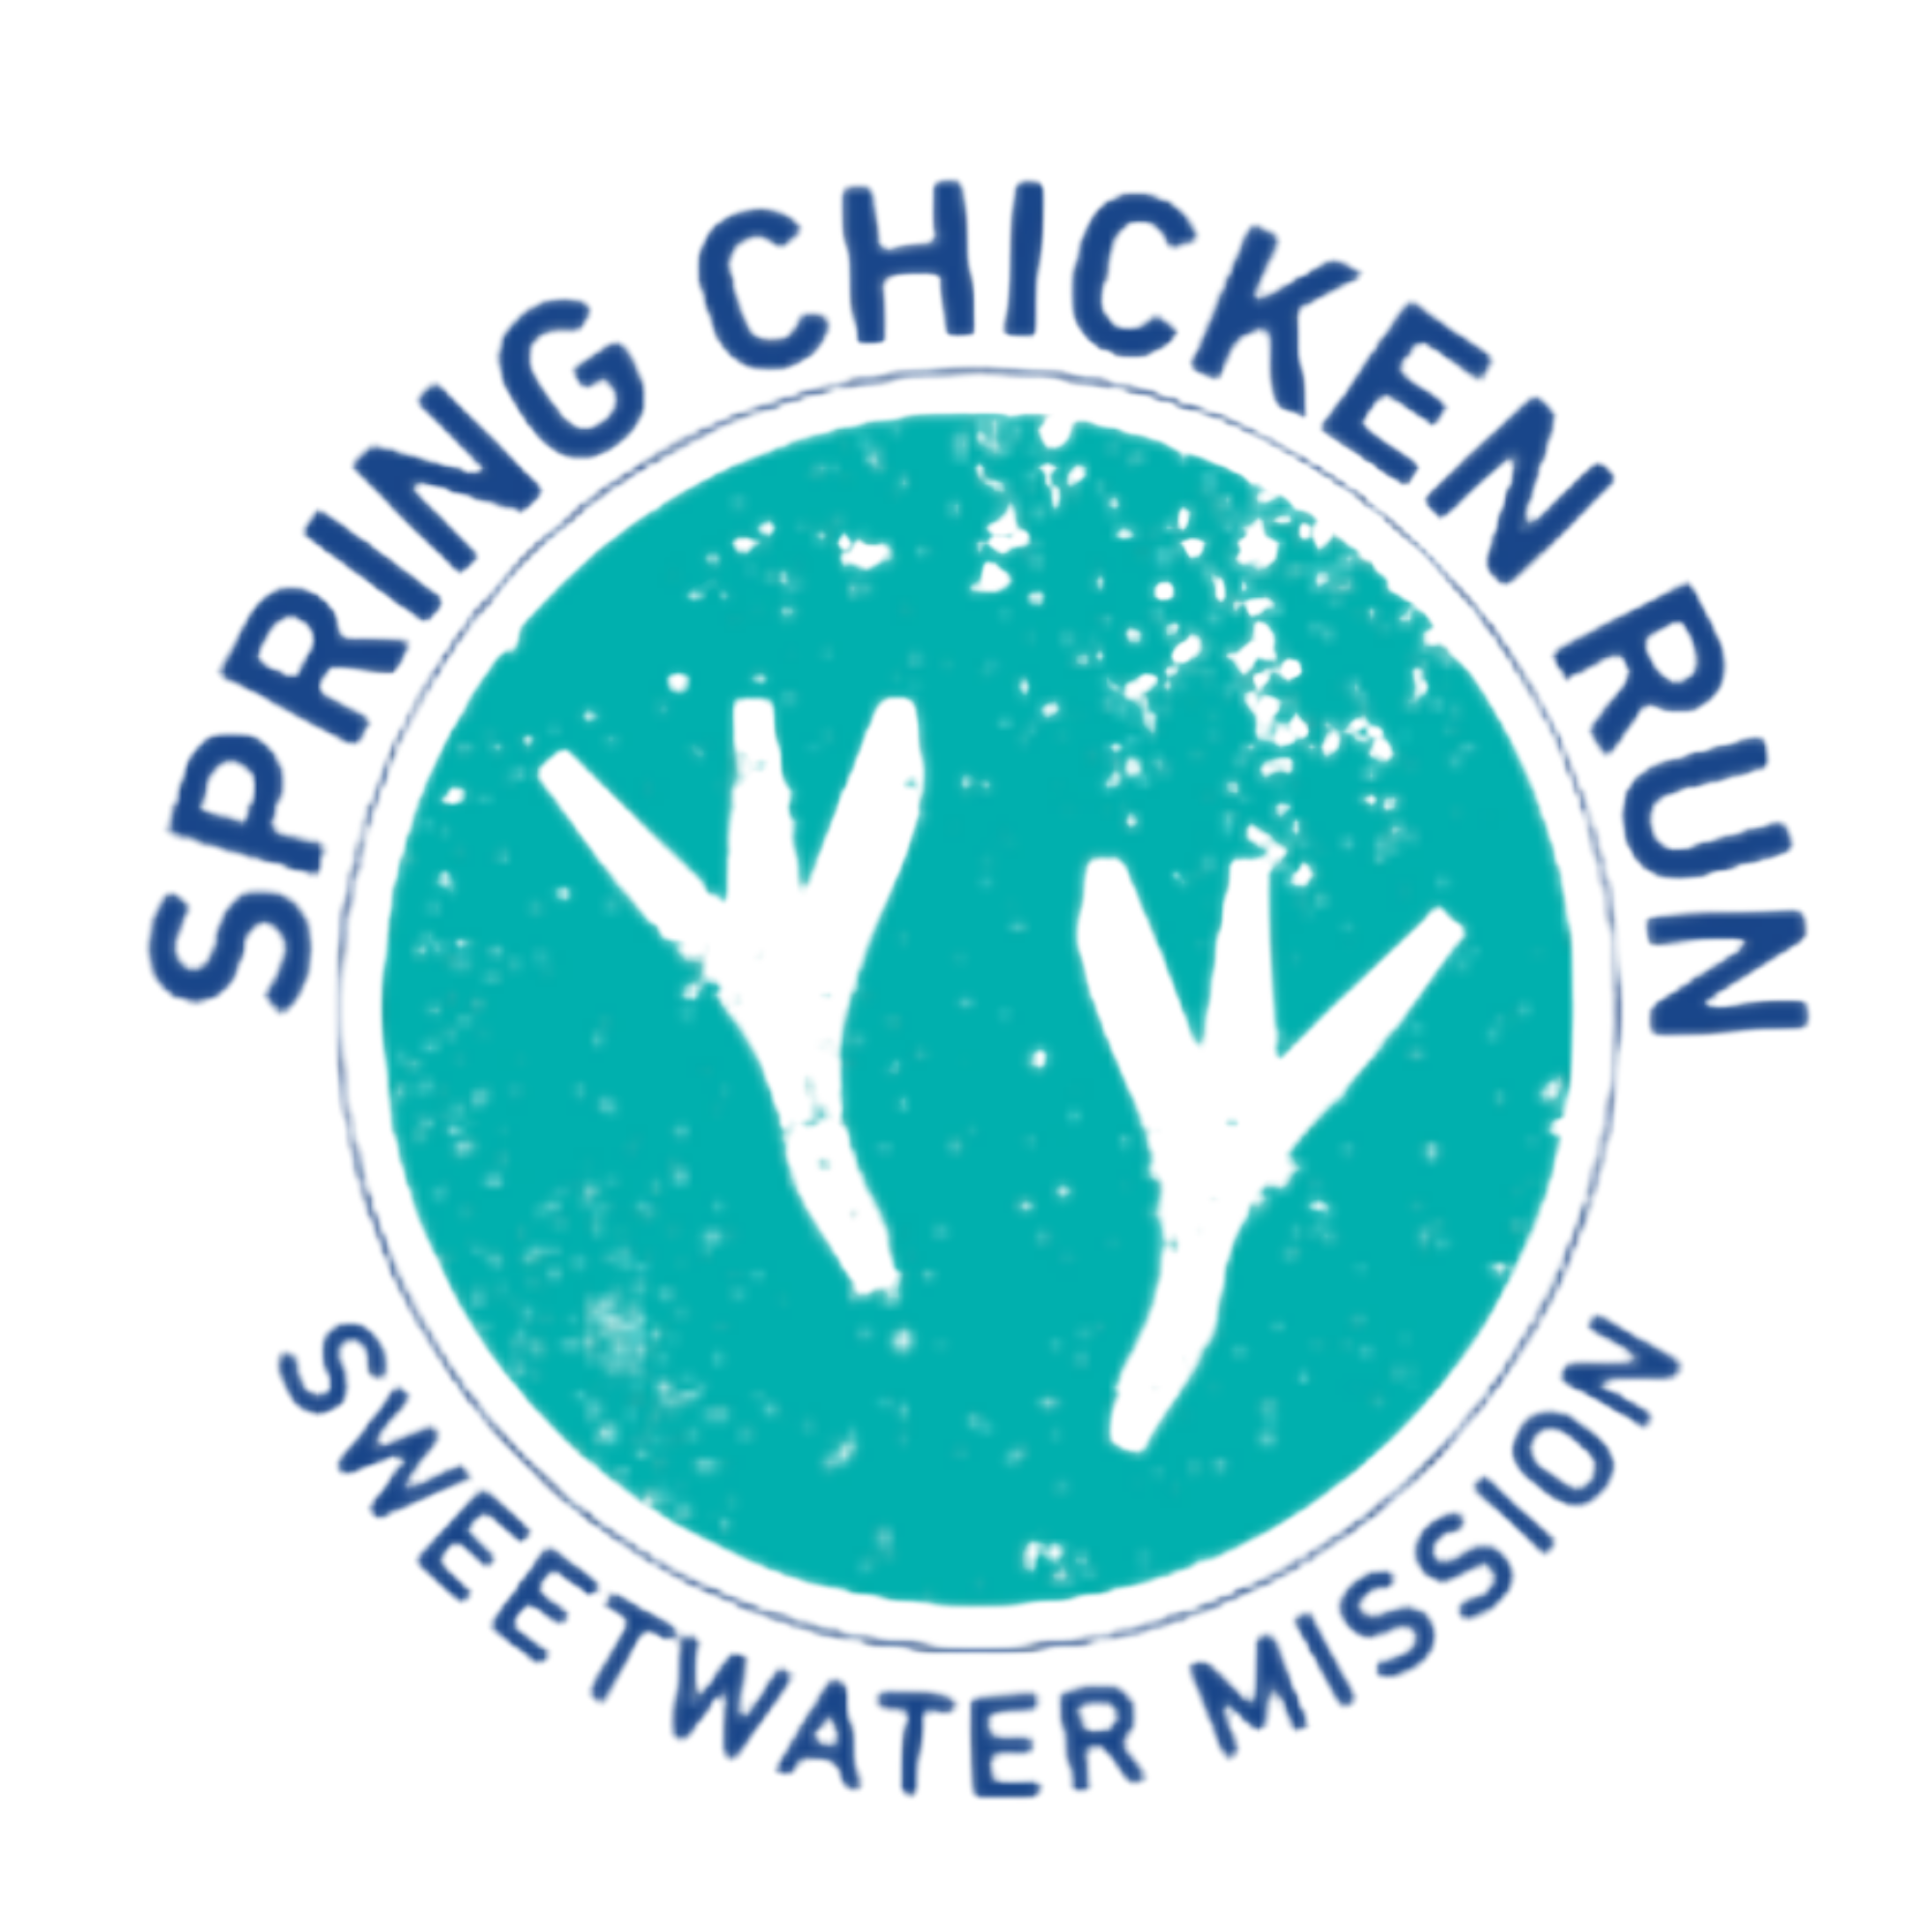 Sweetwater Mission Spring Chicken Run logo on RaceRaves